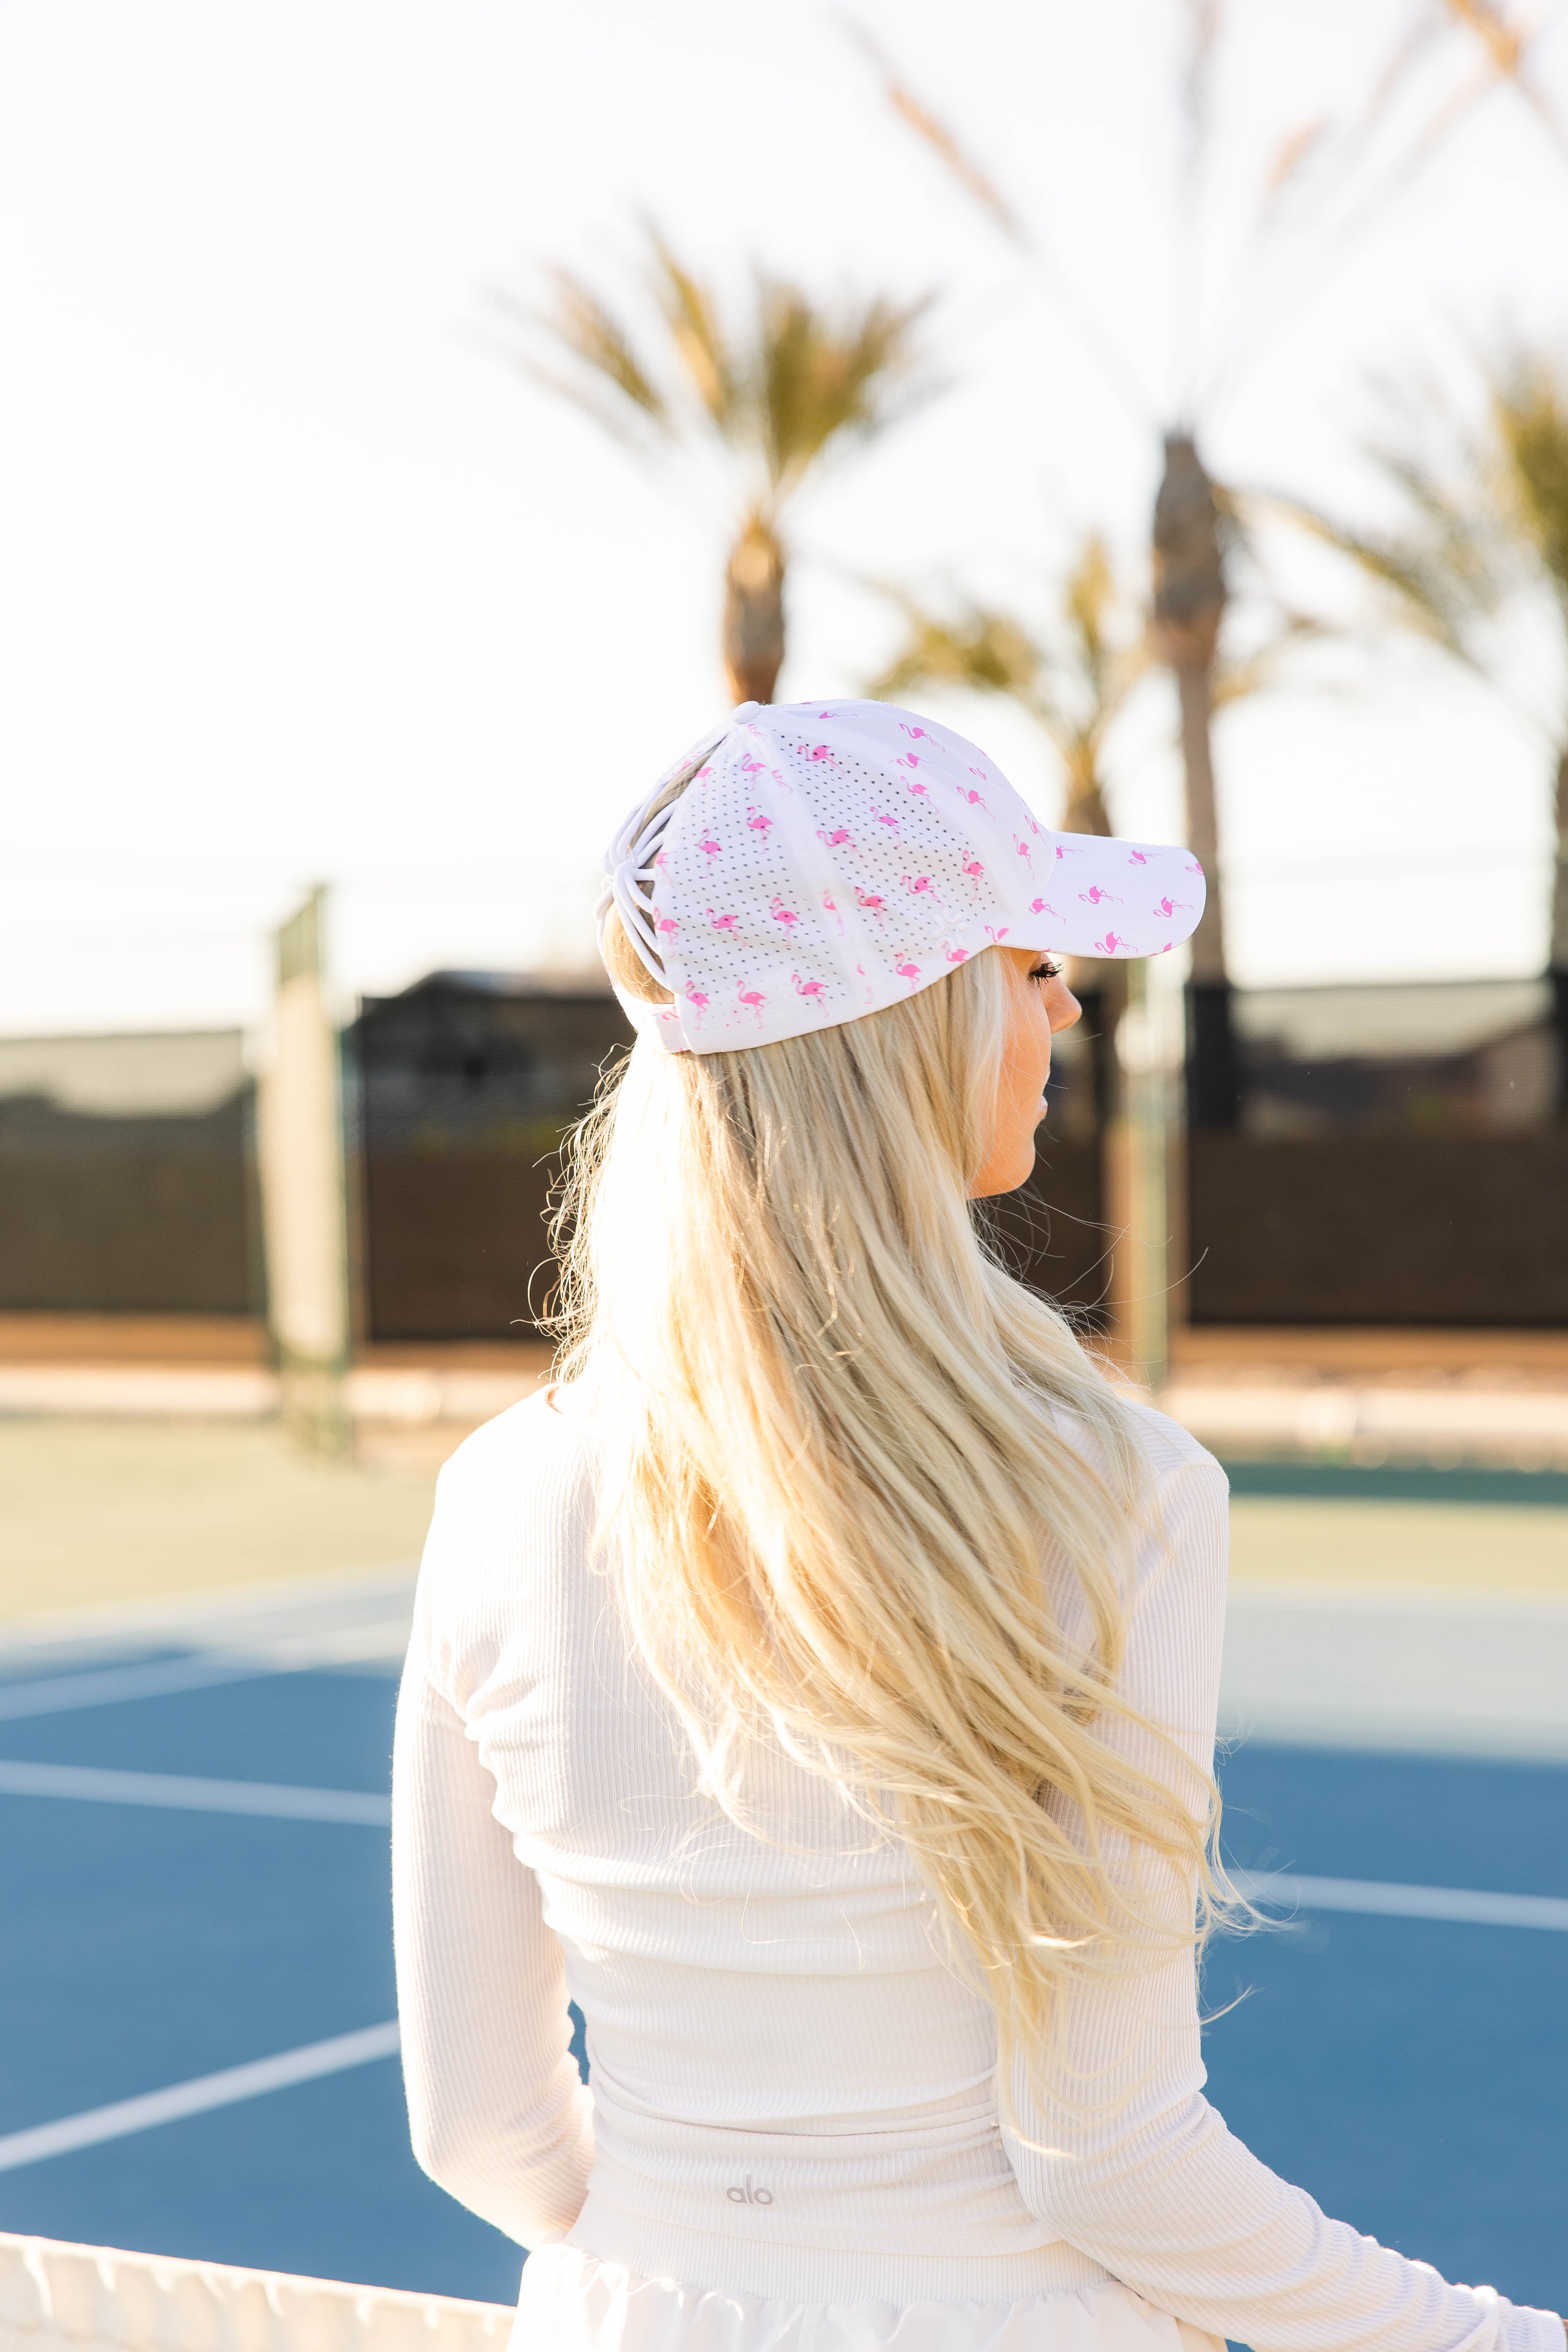 Bucket Hat - Flamingo Floaty | Embroidered to Order | 100% Cotton Twill  Black White Fishing Summer Hat for Men and Women